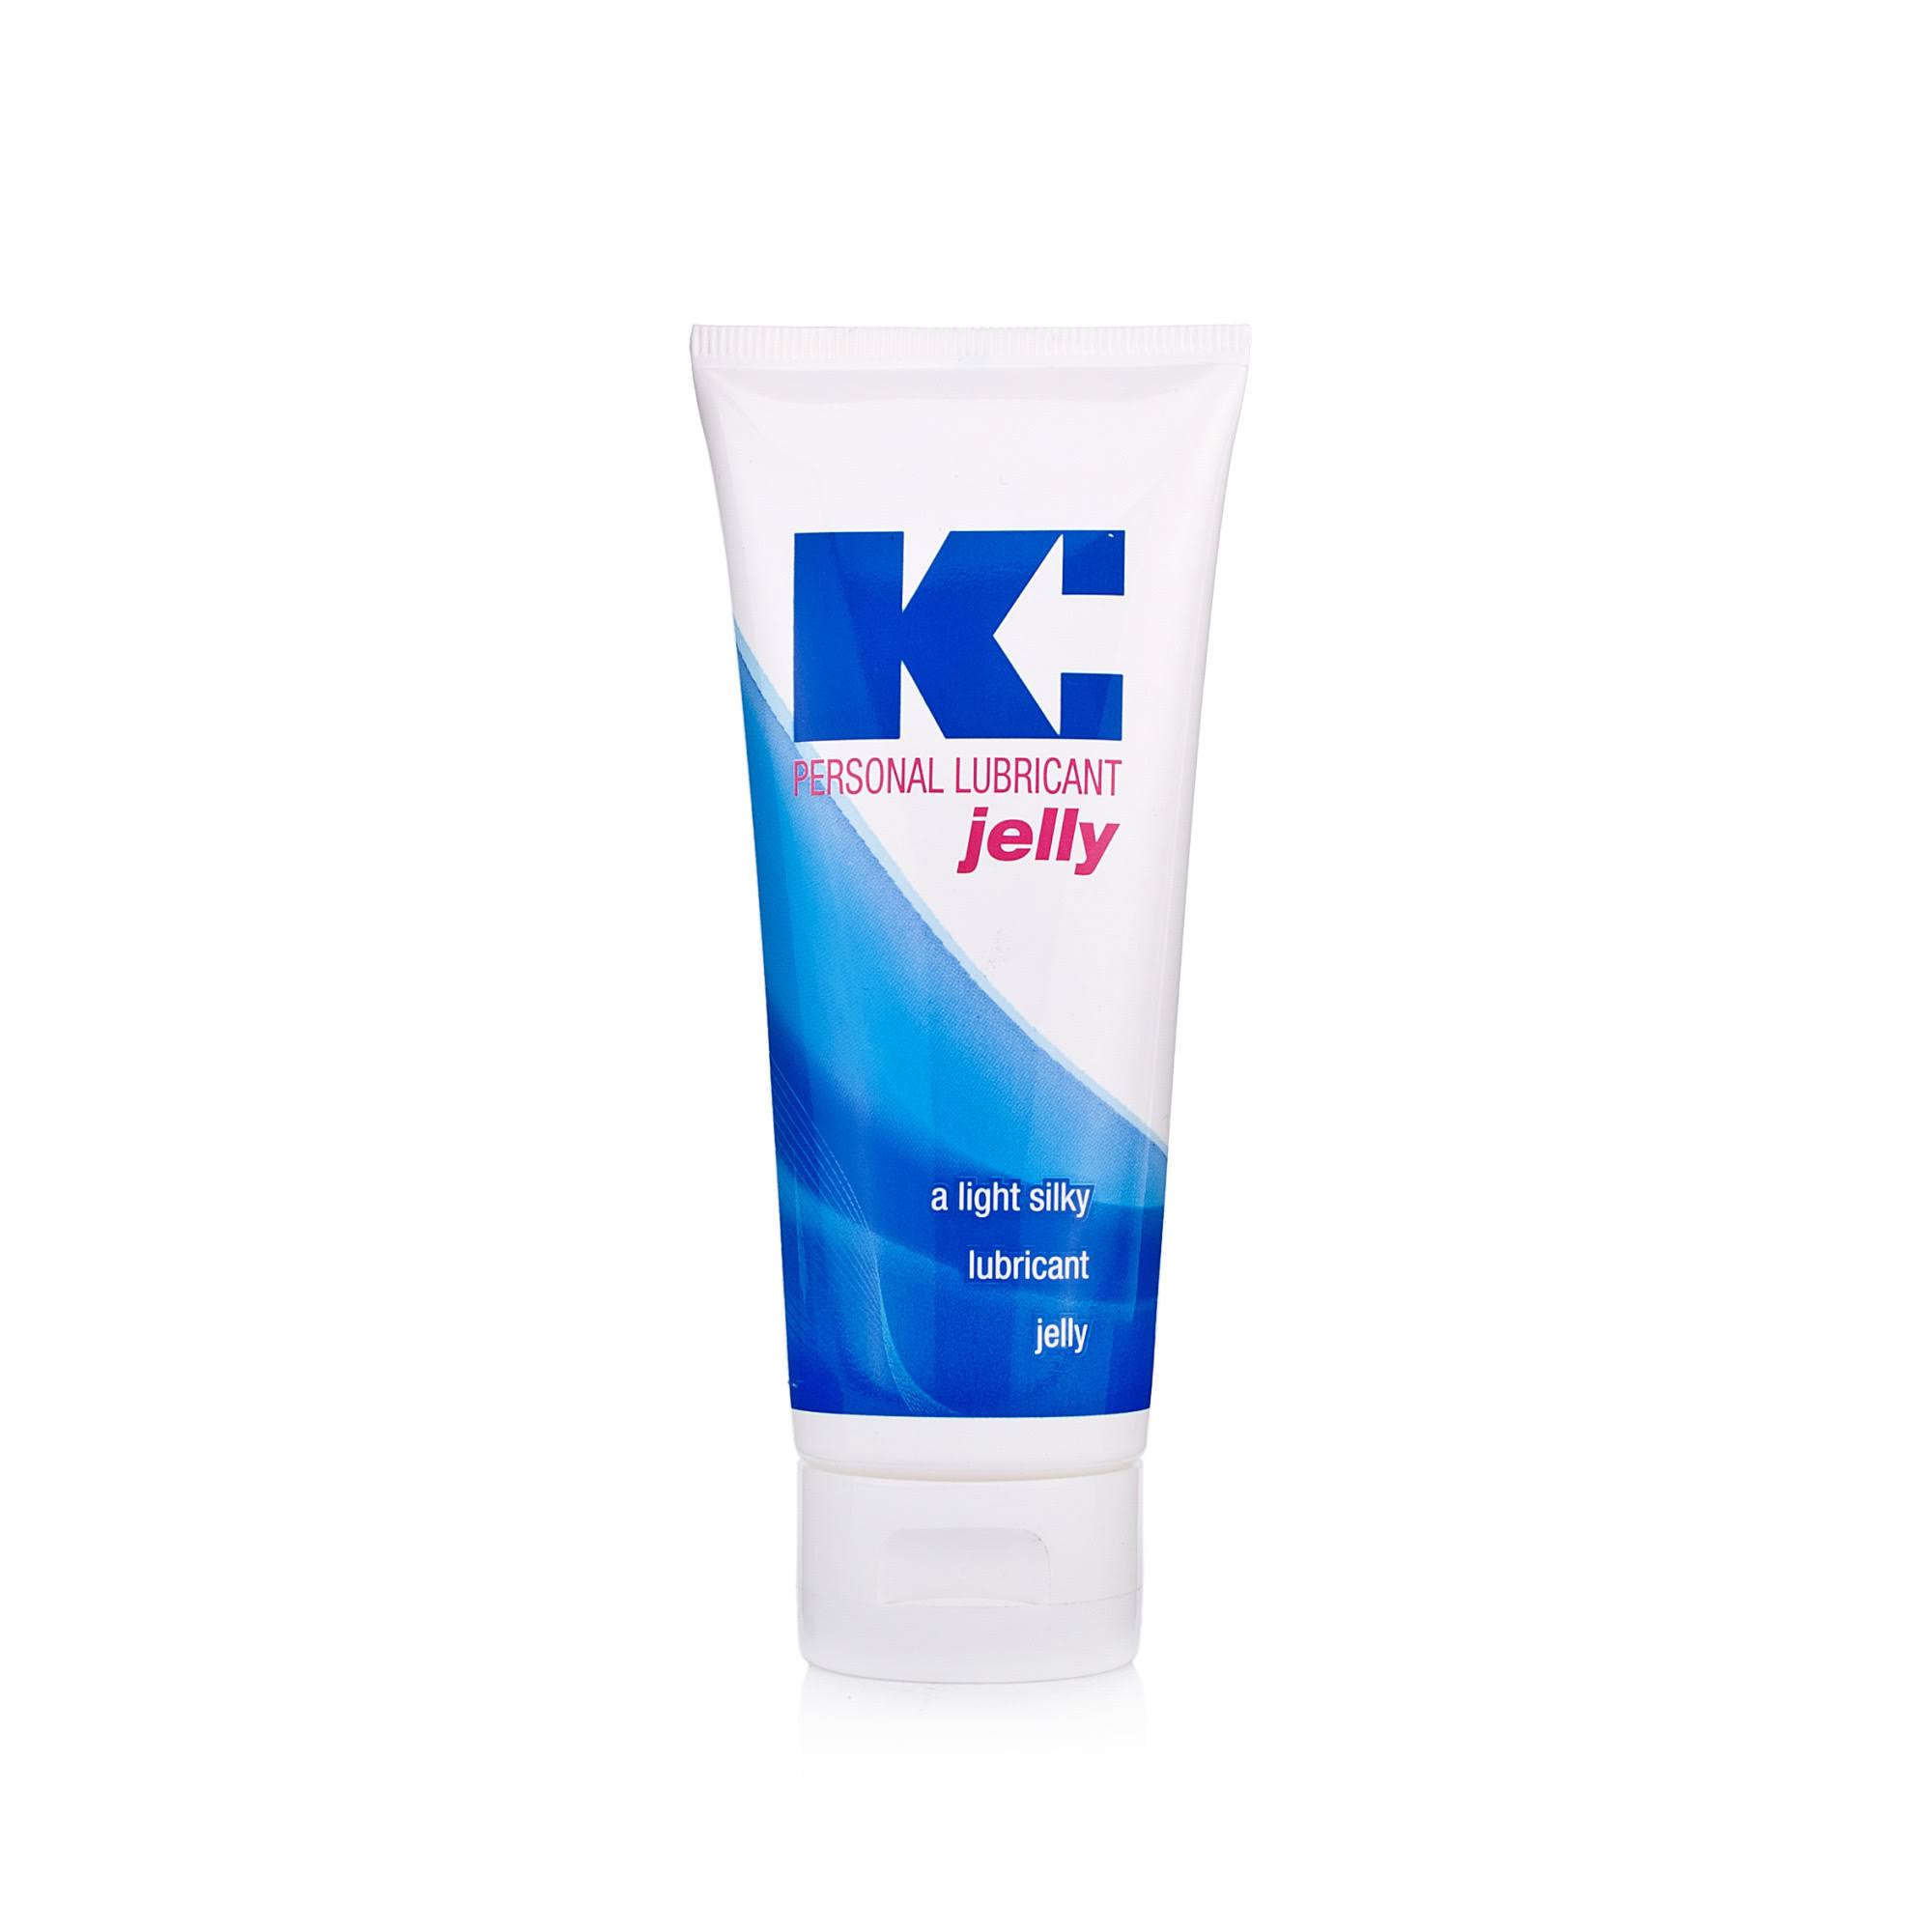 K-Y Jelly K: Personal Lubricant Jelly